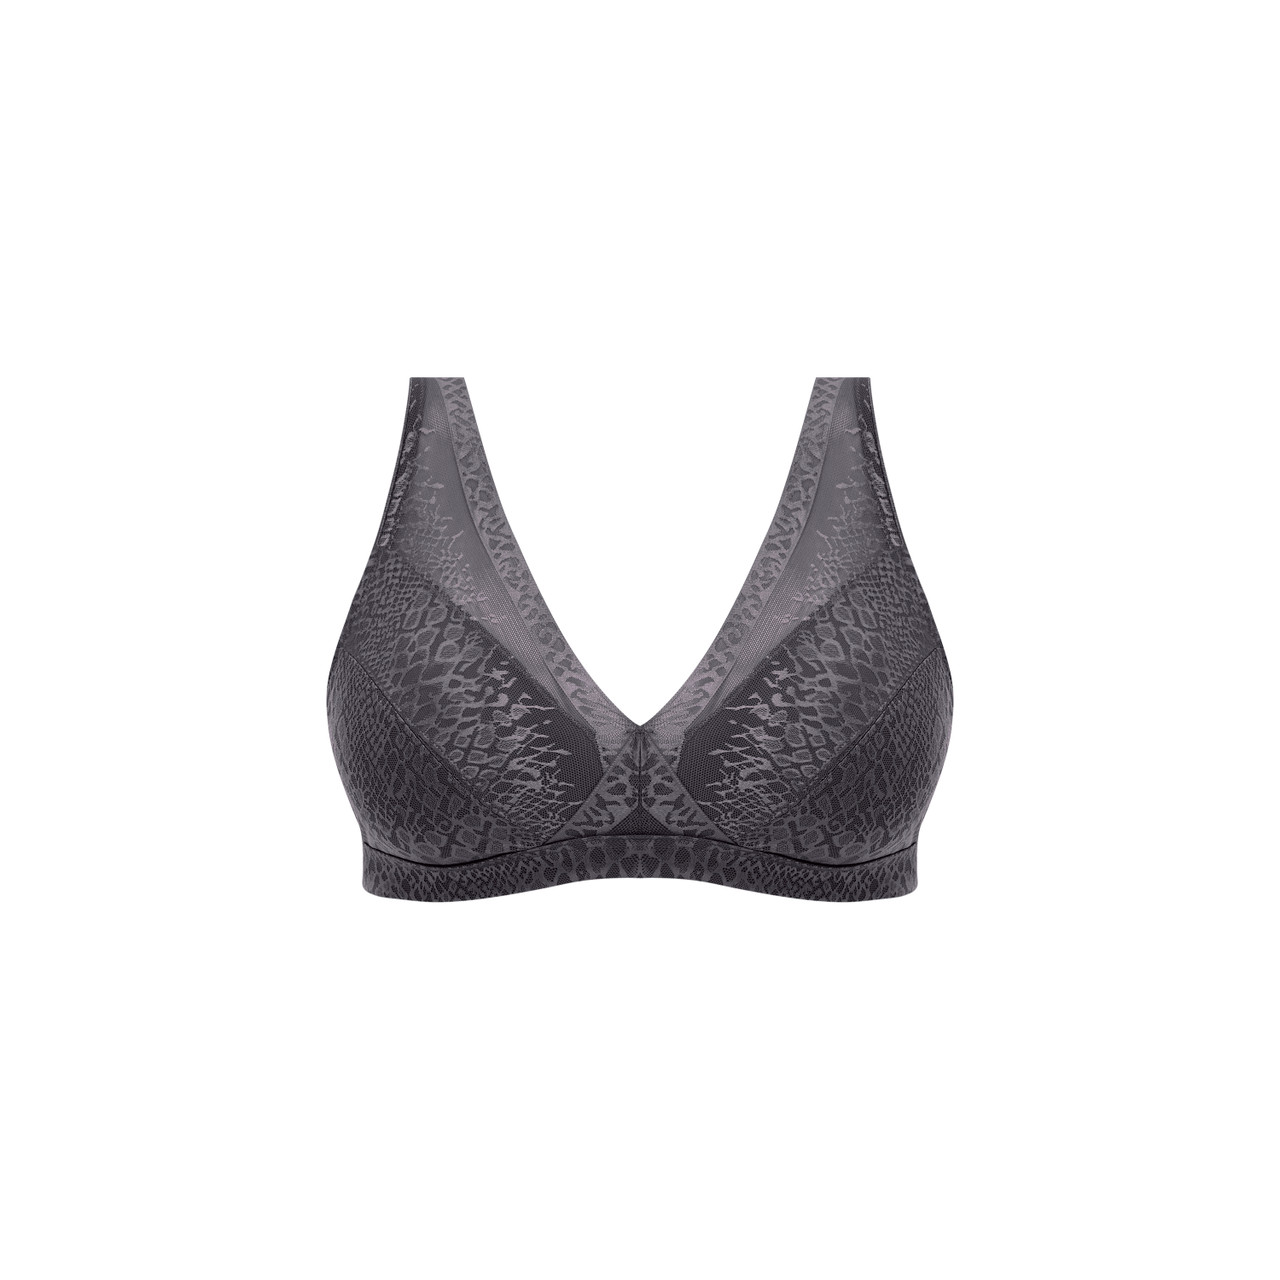 Fantasie Envisage Non-Wired Bralette in Slate (SLE) - Busted Bra Shop